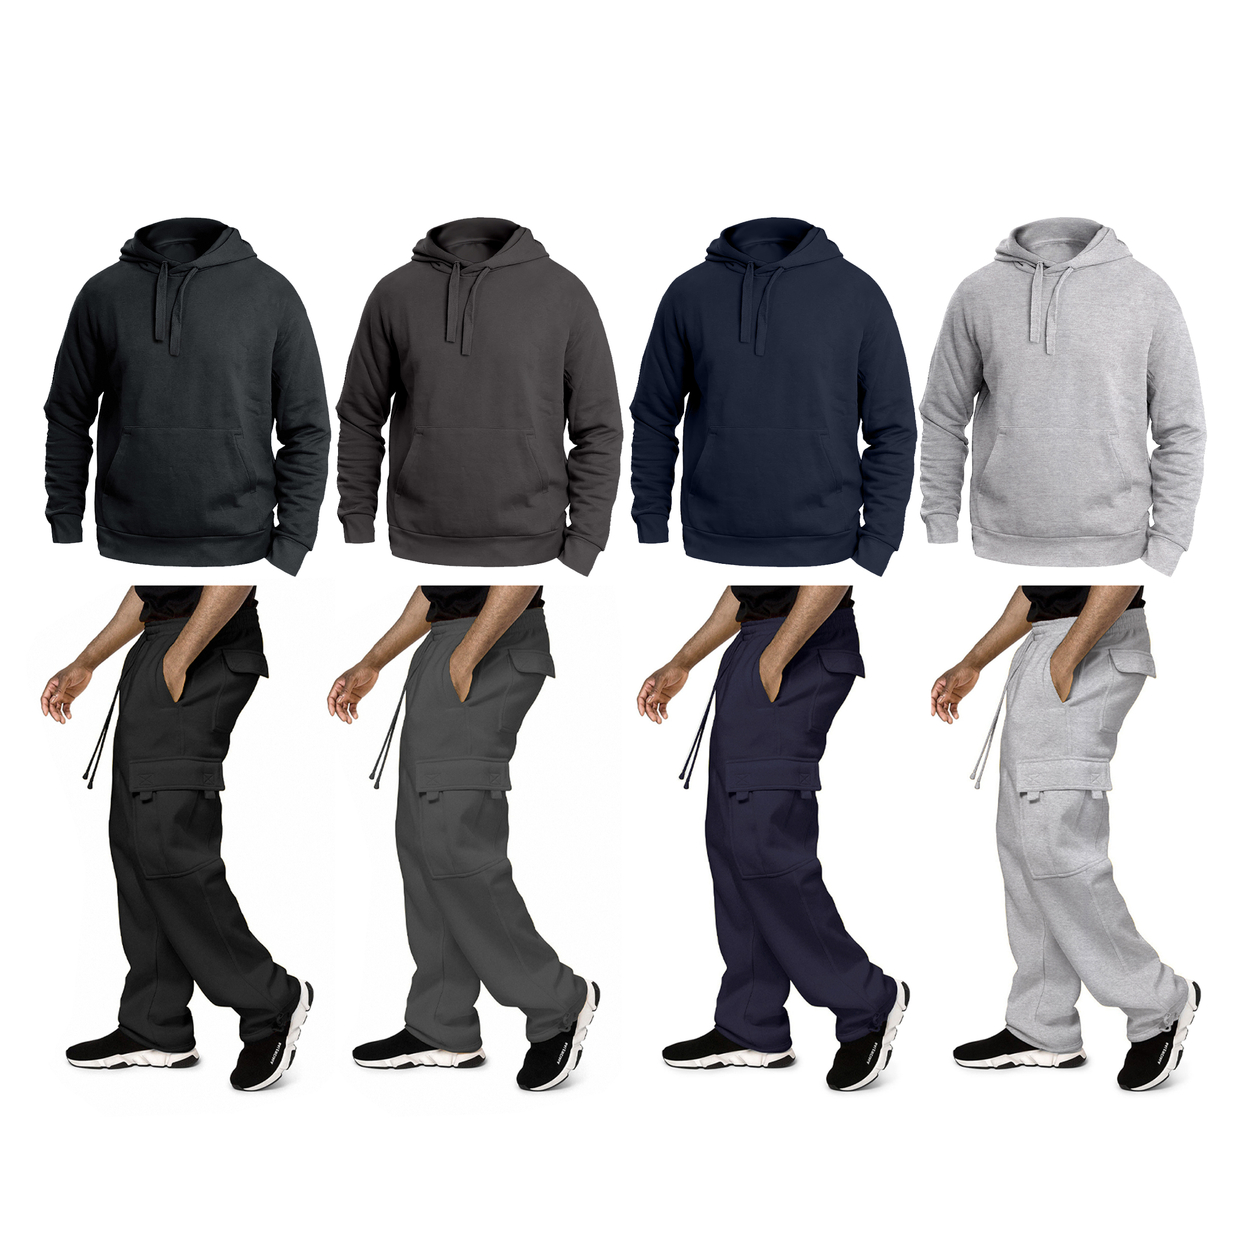 Multi-Pack: Big & Tall Men's Winter Warm Cozy Athletic Fleece Lined Multi-Pocket Cargo Sweatsuit - Charcoal, 2-pack, X-large